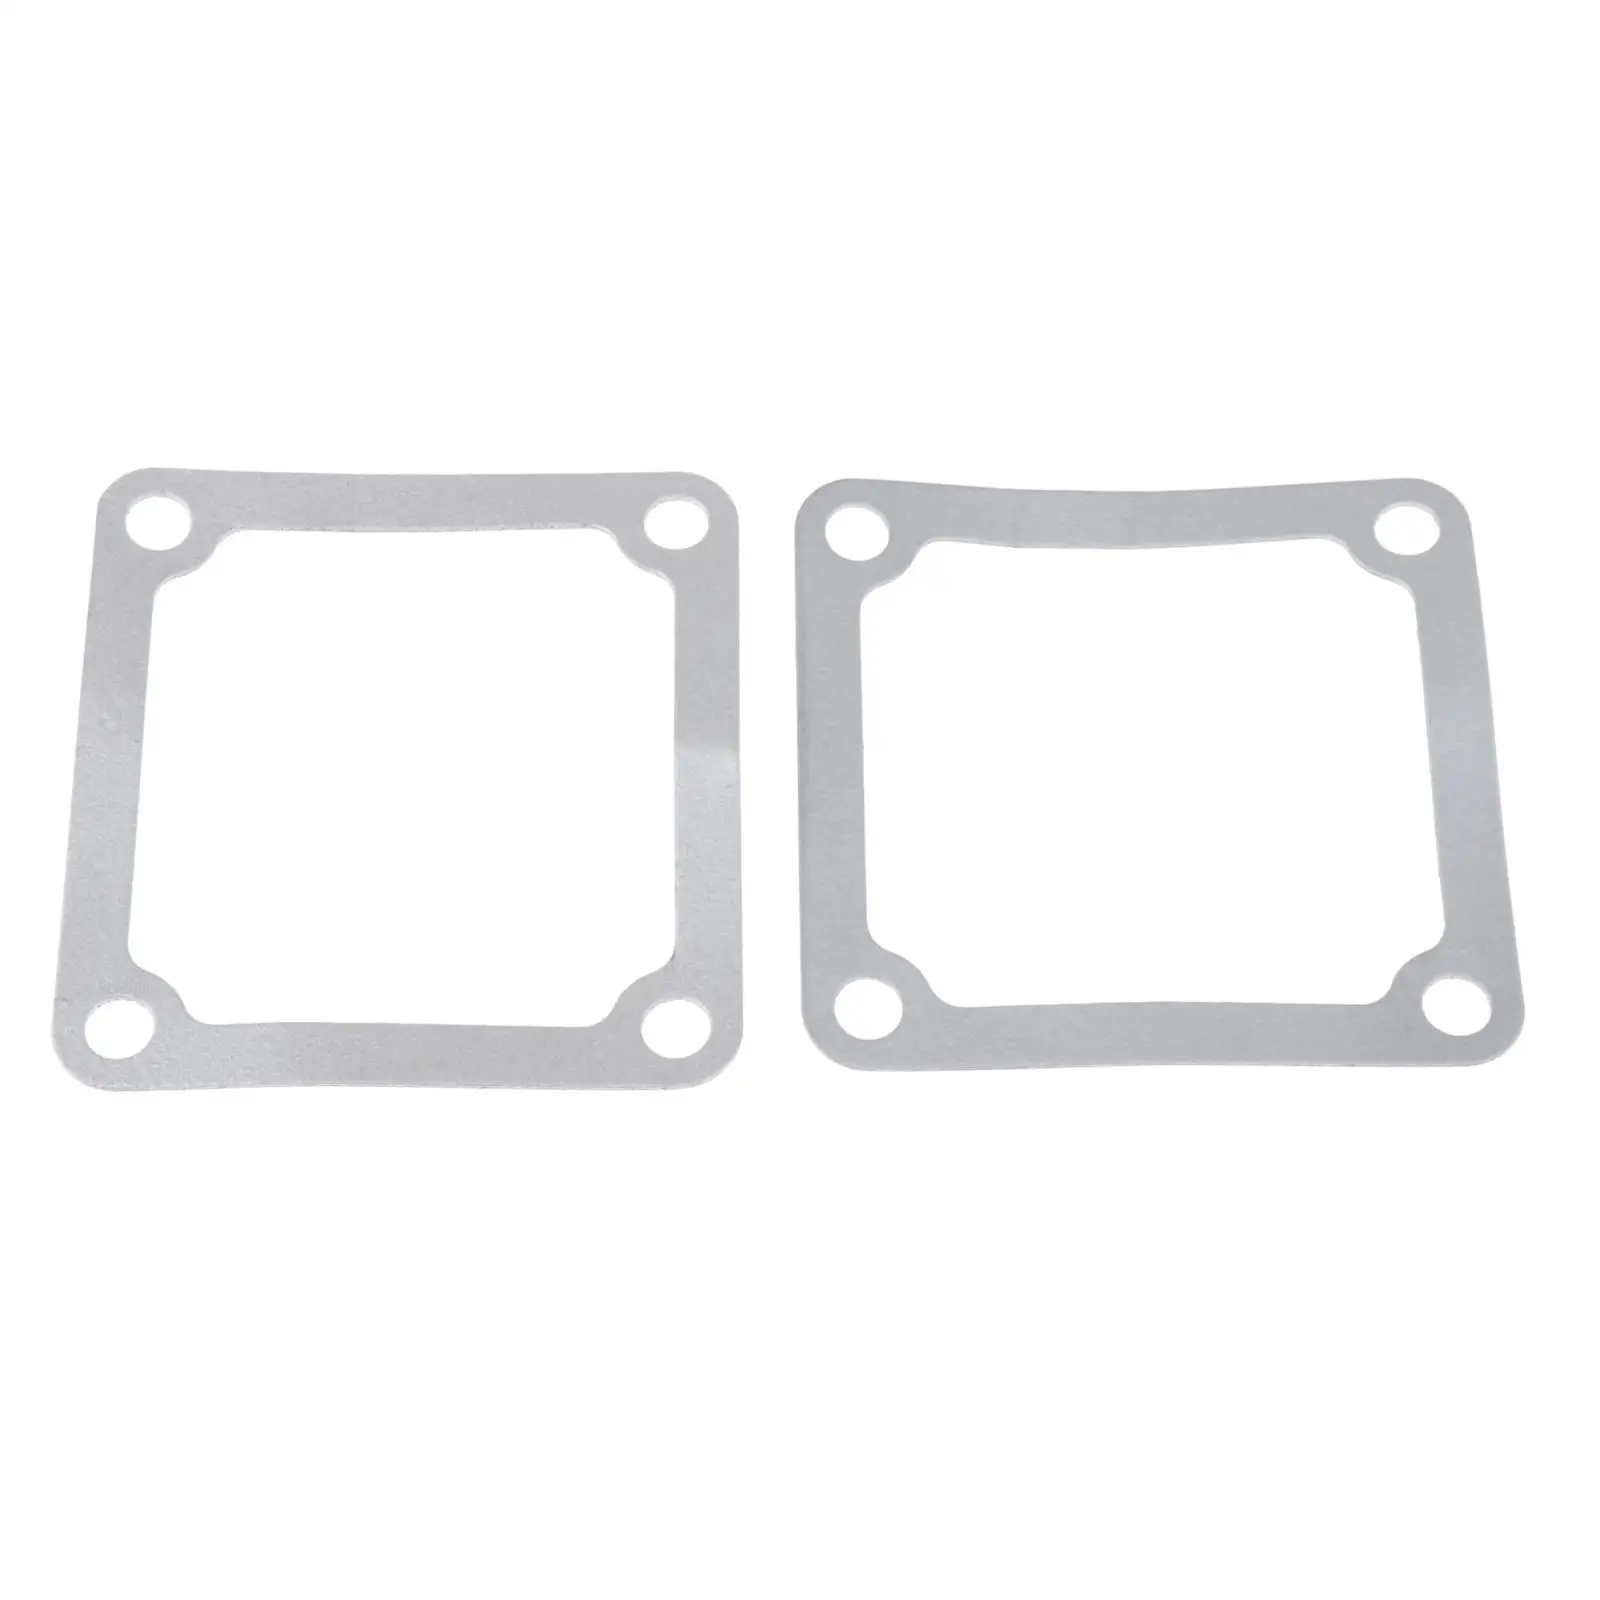 2Pcs Intake Heater Grid Gaskets for 5.9L Vehicle Strong Sealing Accessory 89-07 Sturdy Auto Parts Paper